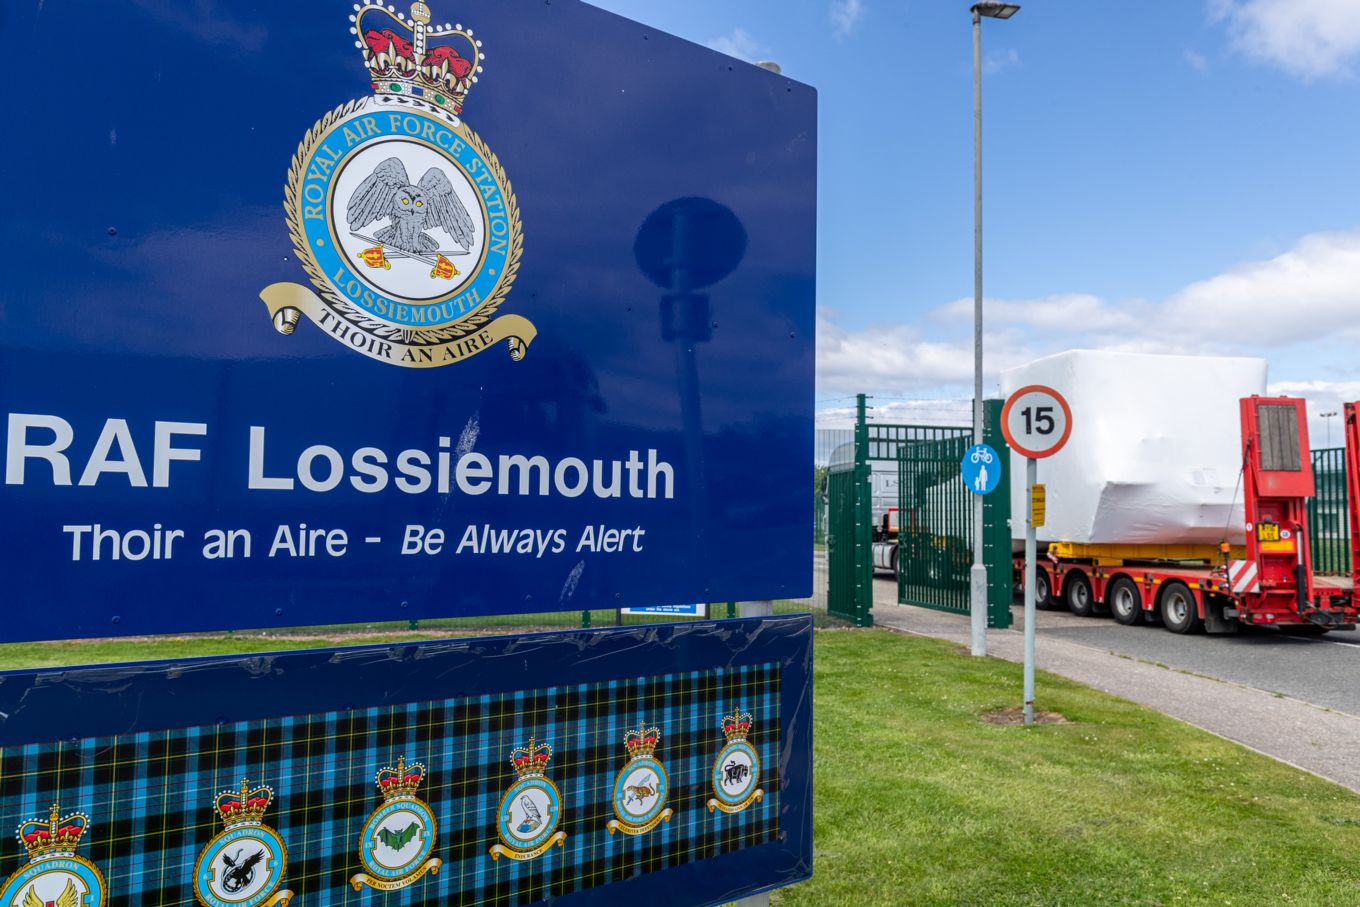 RAF Lossiemouth sign and truck.